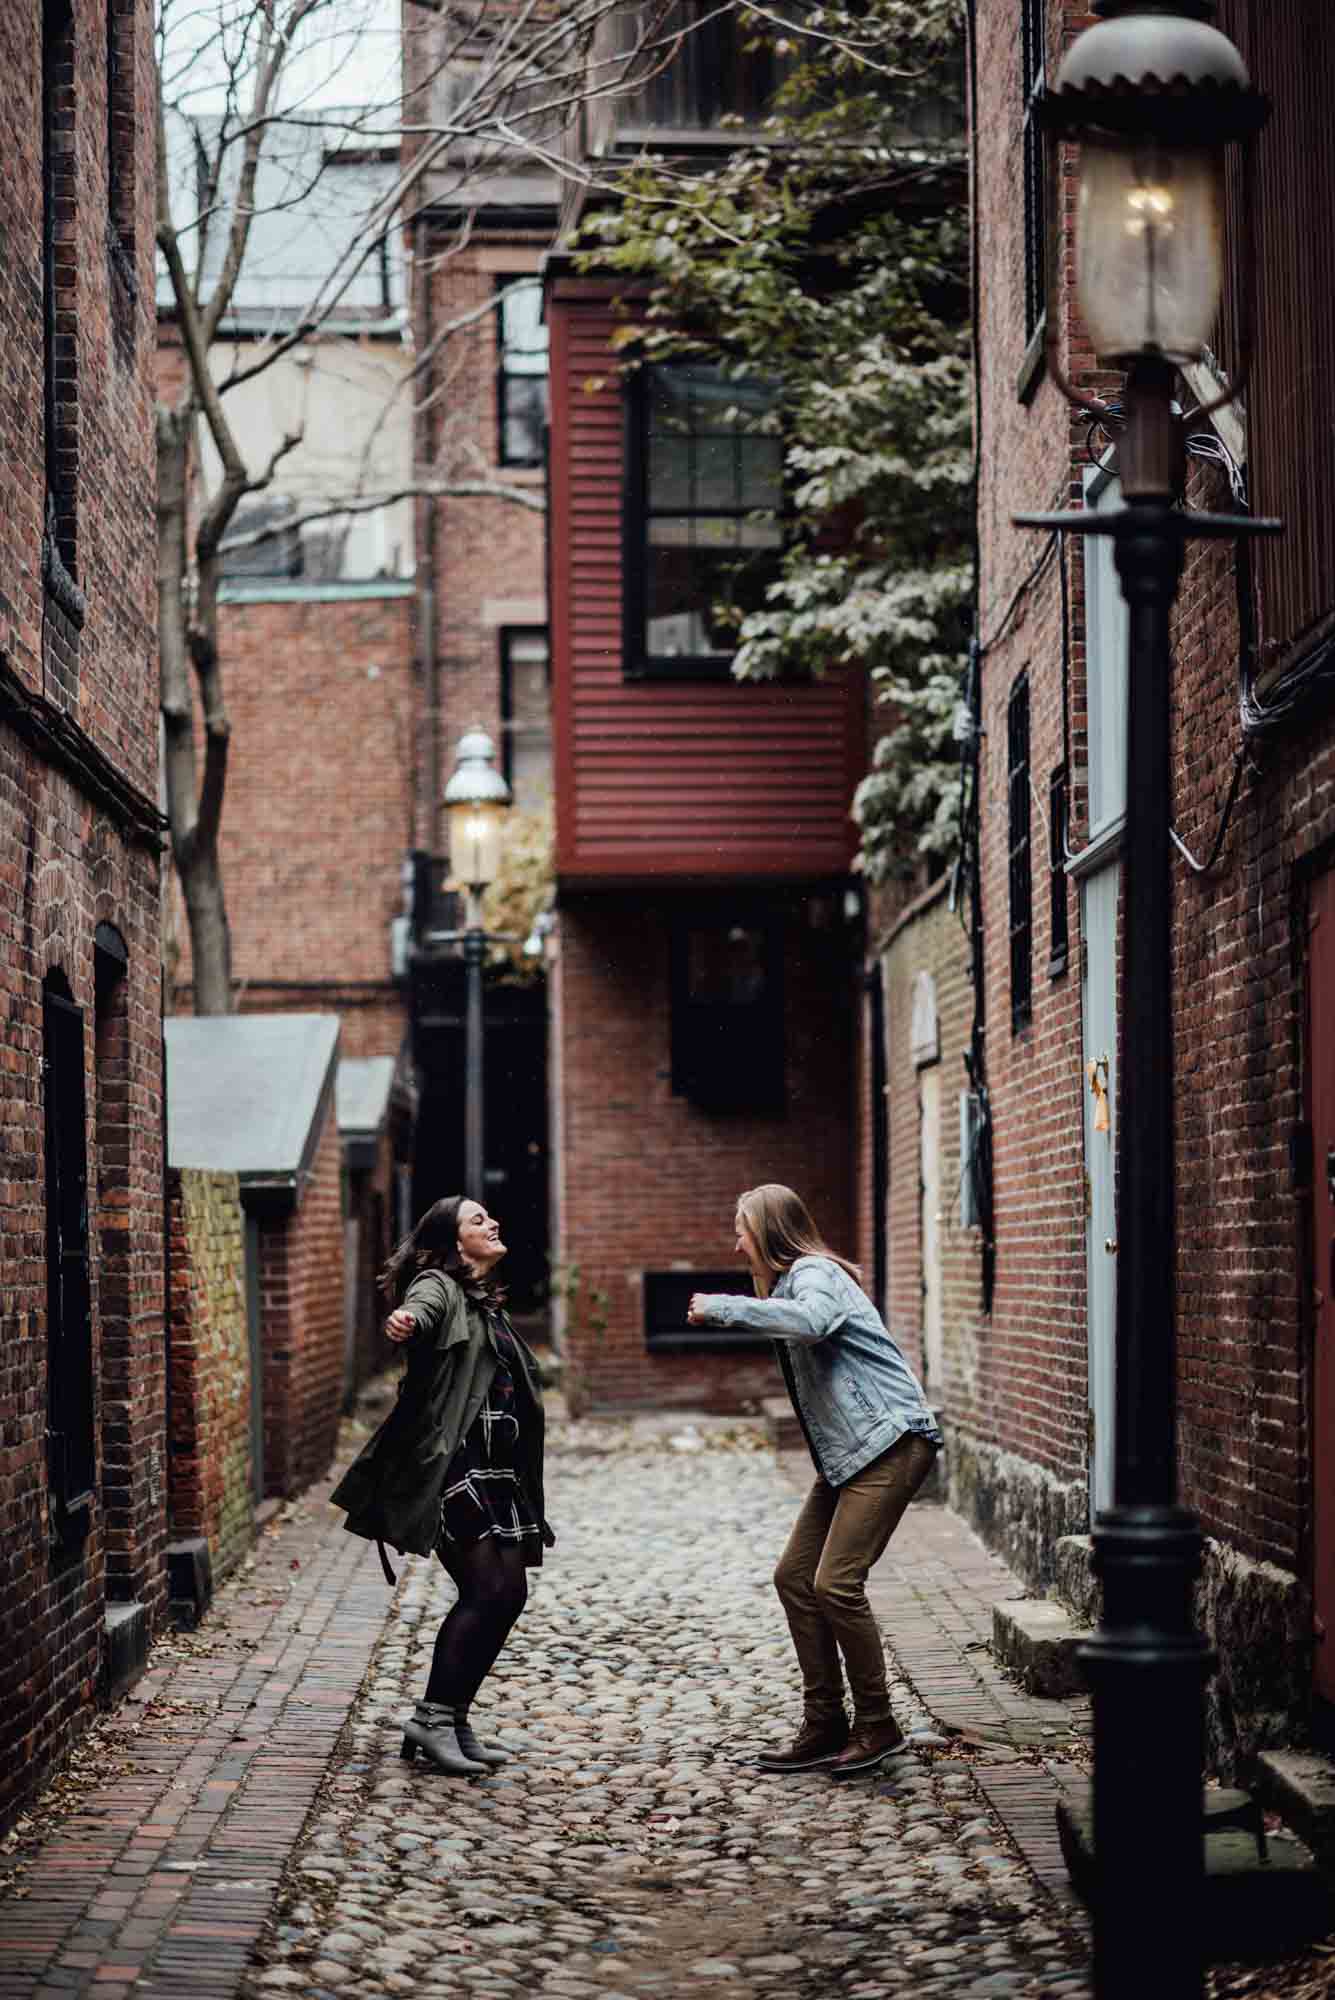 Afternoon engagement session in Boston after concert proposal | Rowan Oaks Studios | Featured on Equally Wed, the leading LGBTQ+ wedding magazine